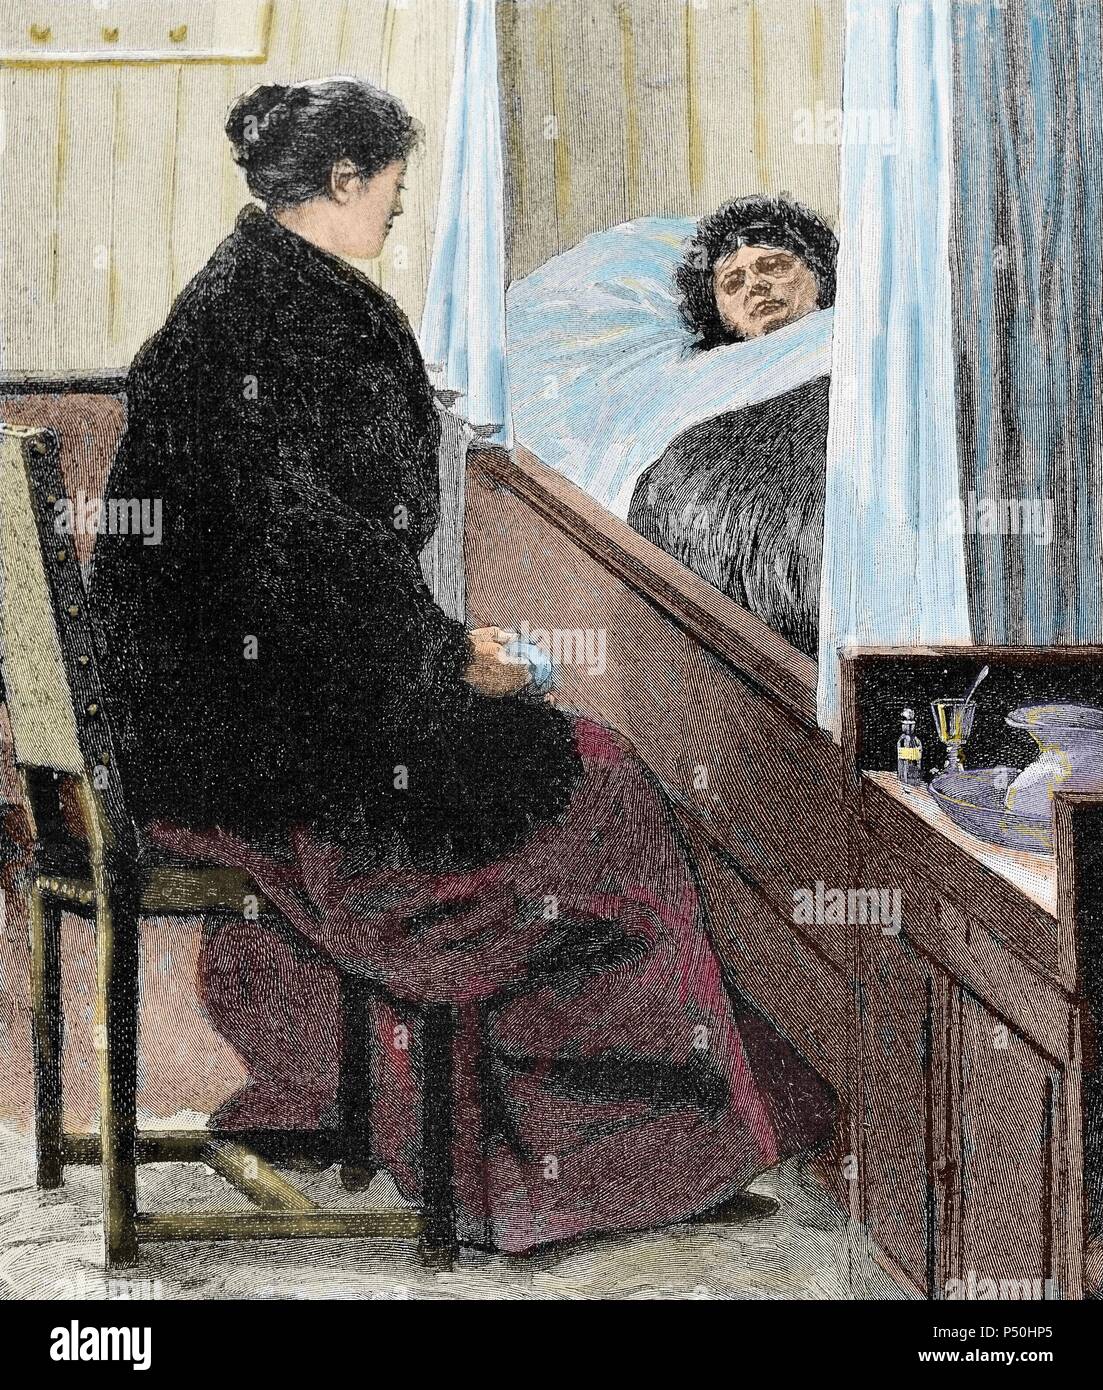 Visiting a sick woman. Colored engraving of 'The Artistic Illustration,' 1892. Stock Photo